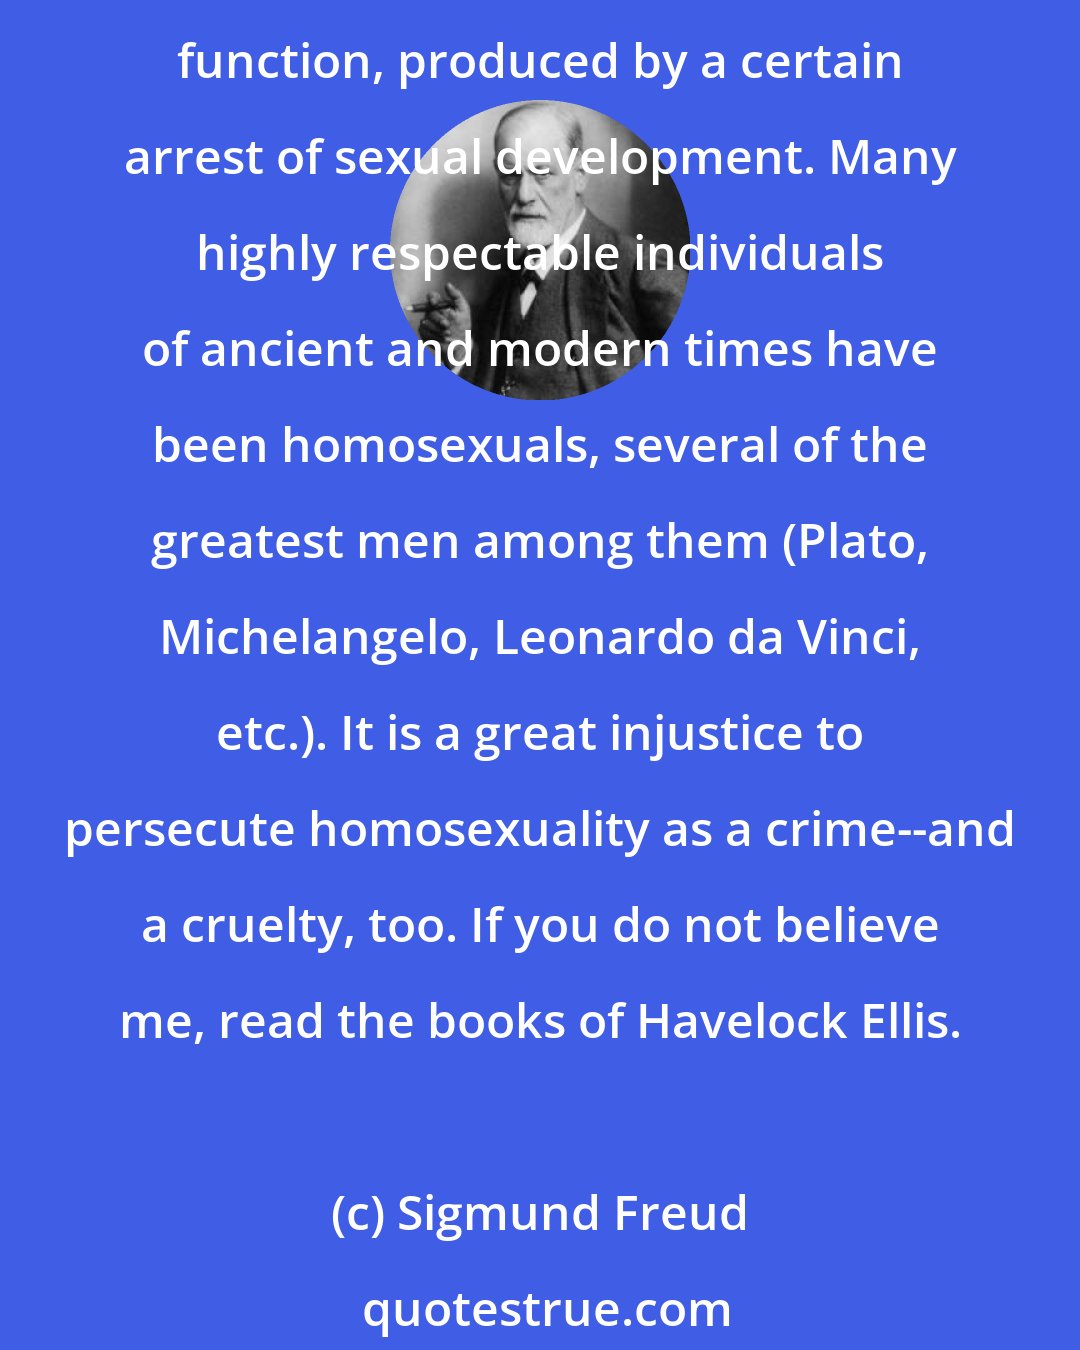 Sigmund Freud: Homosexuality is assuredly no advantage, but it is nothing to be ashamed of, no vice, no degradation; it cannot be classified as an illness; we consider it to be a variation of the sexual function, produced by a certain arrest of sexual development. Many highly respectable individuals of ancient and modern times have been homosexuals, several of the greatest men among them (Plato, Michelangelo, Leonardo da Vinci, etc.). It is a great injustice to persecute homosexuality as a crime--and a cruelty, too. If you do not believe me, read the books of Havelock Ellis.